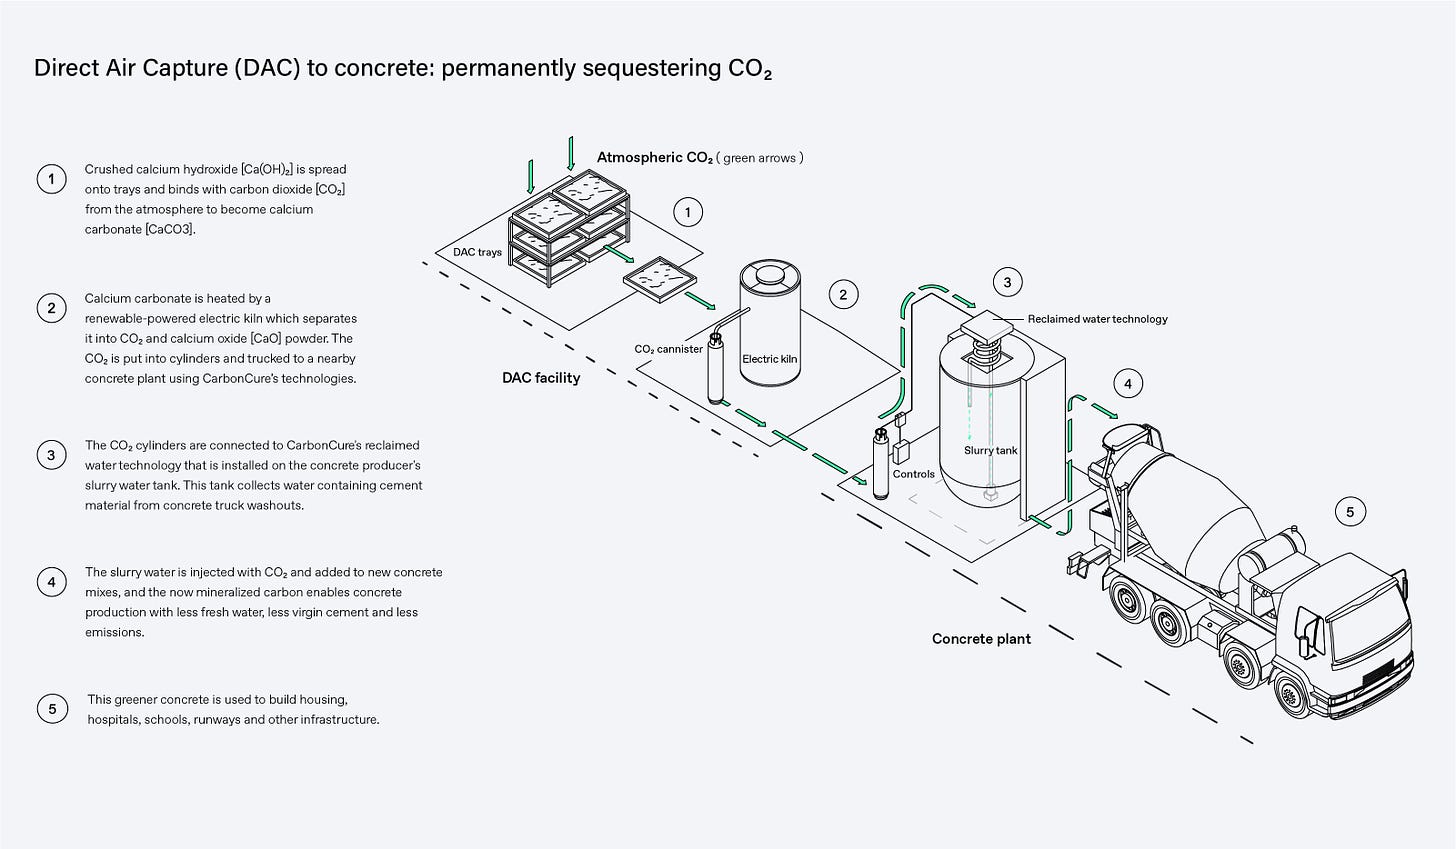 How the Heirloom and CarbonCure DAC to concrete sequestration process works